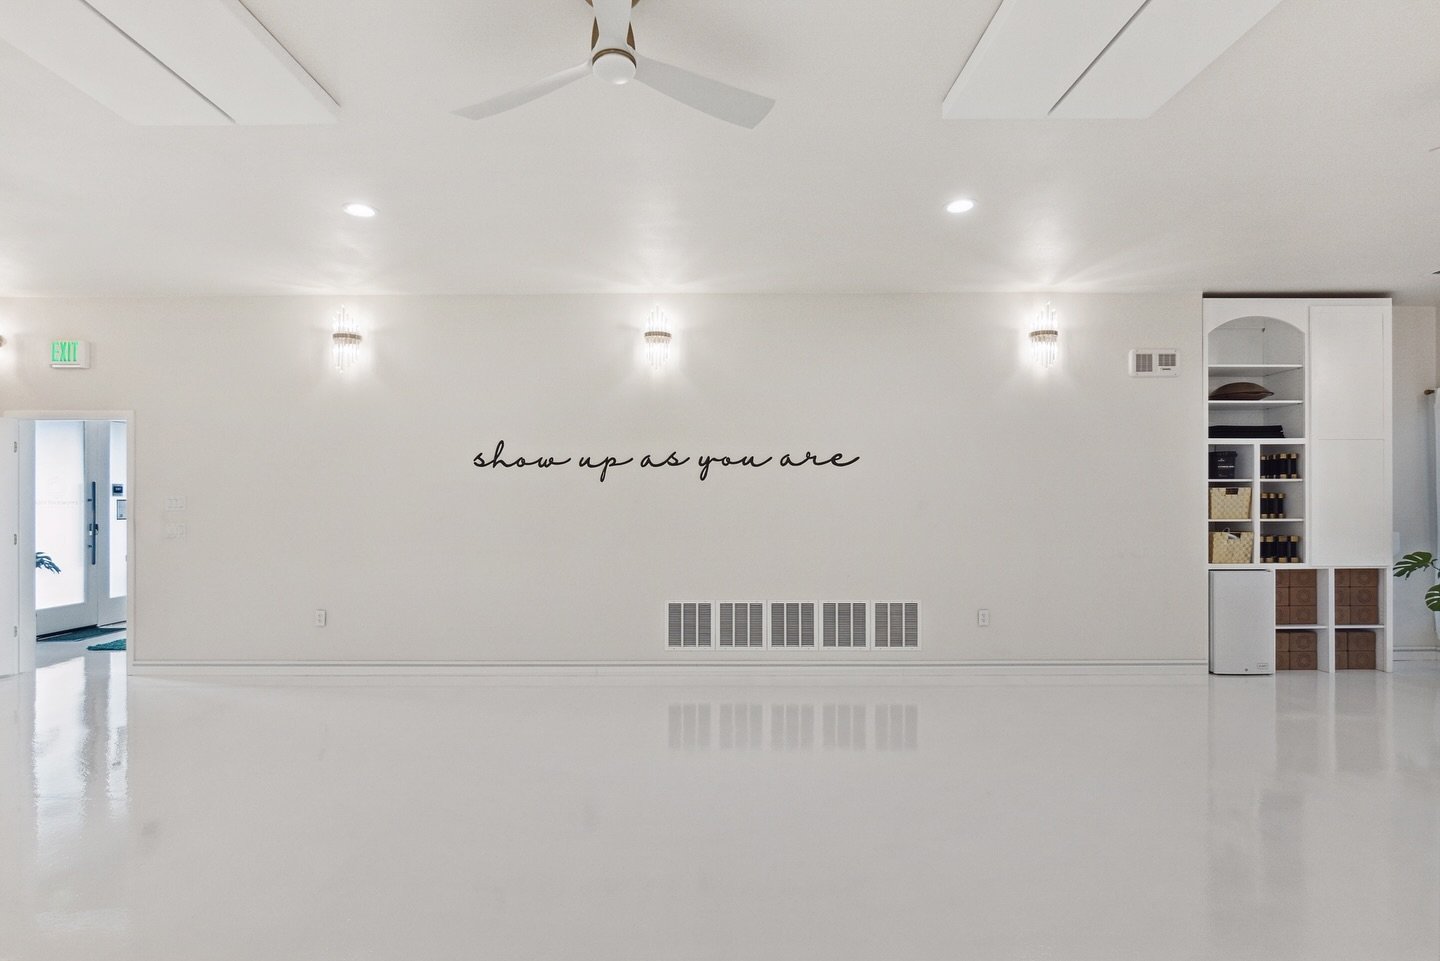 In a world that often encourages us to wear masks, both figuratively and literally, our studio offers a place where you can leave those masks at the door and step onto your mat authentically, vulnerably, and beautifully as you are.
No need to pretend